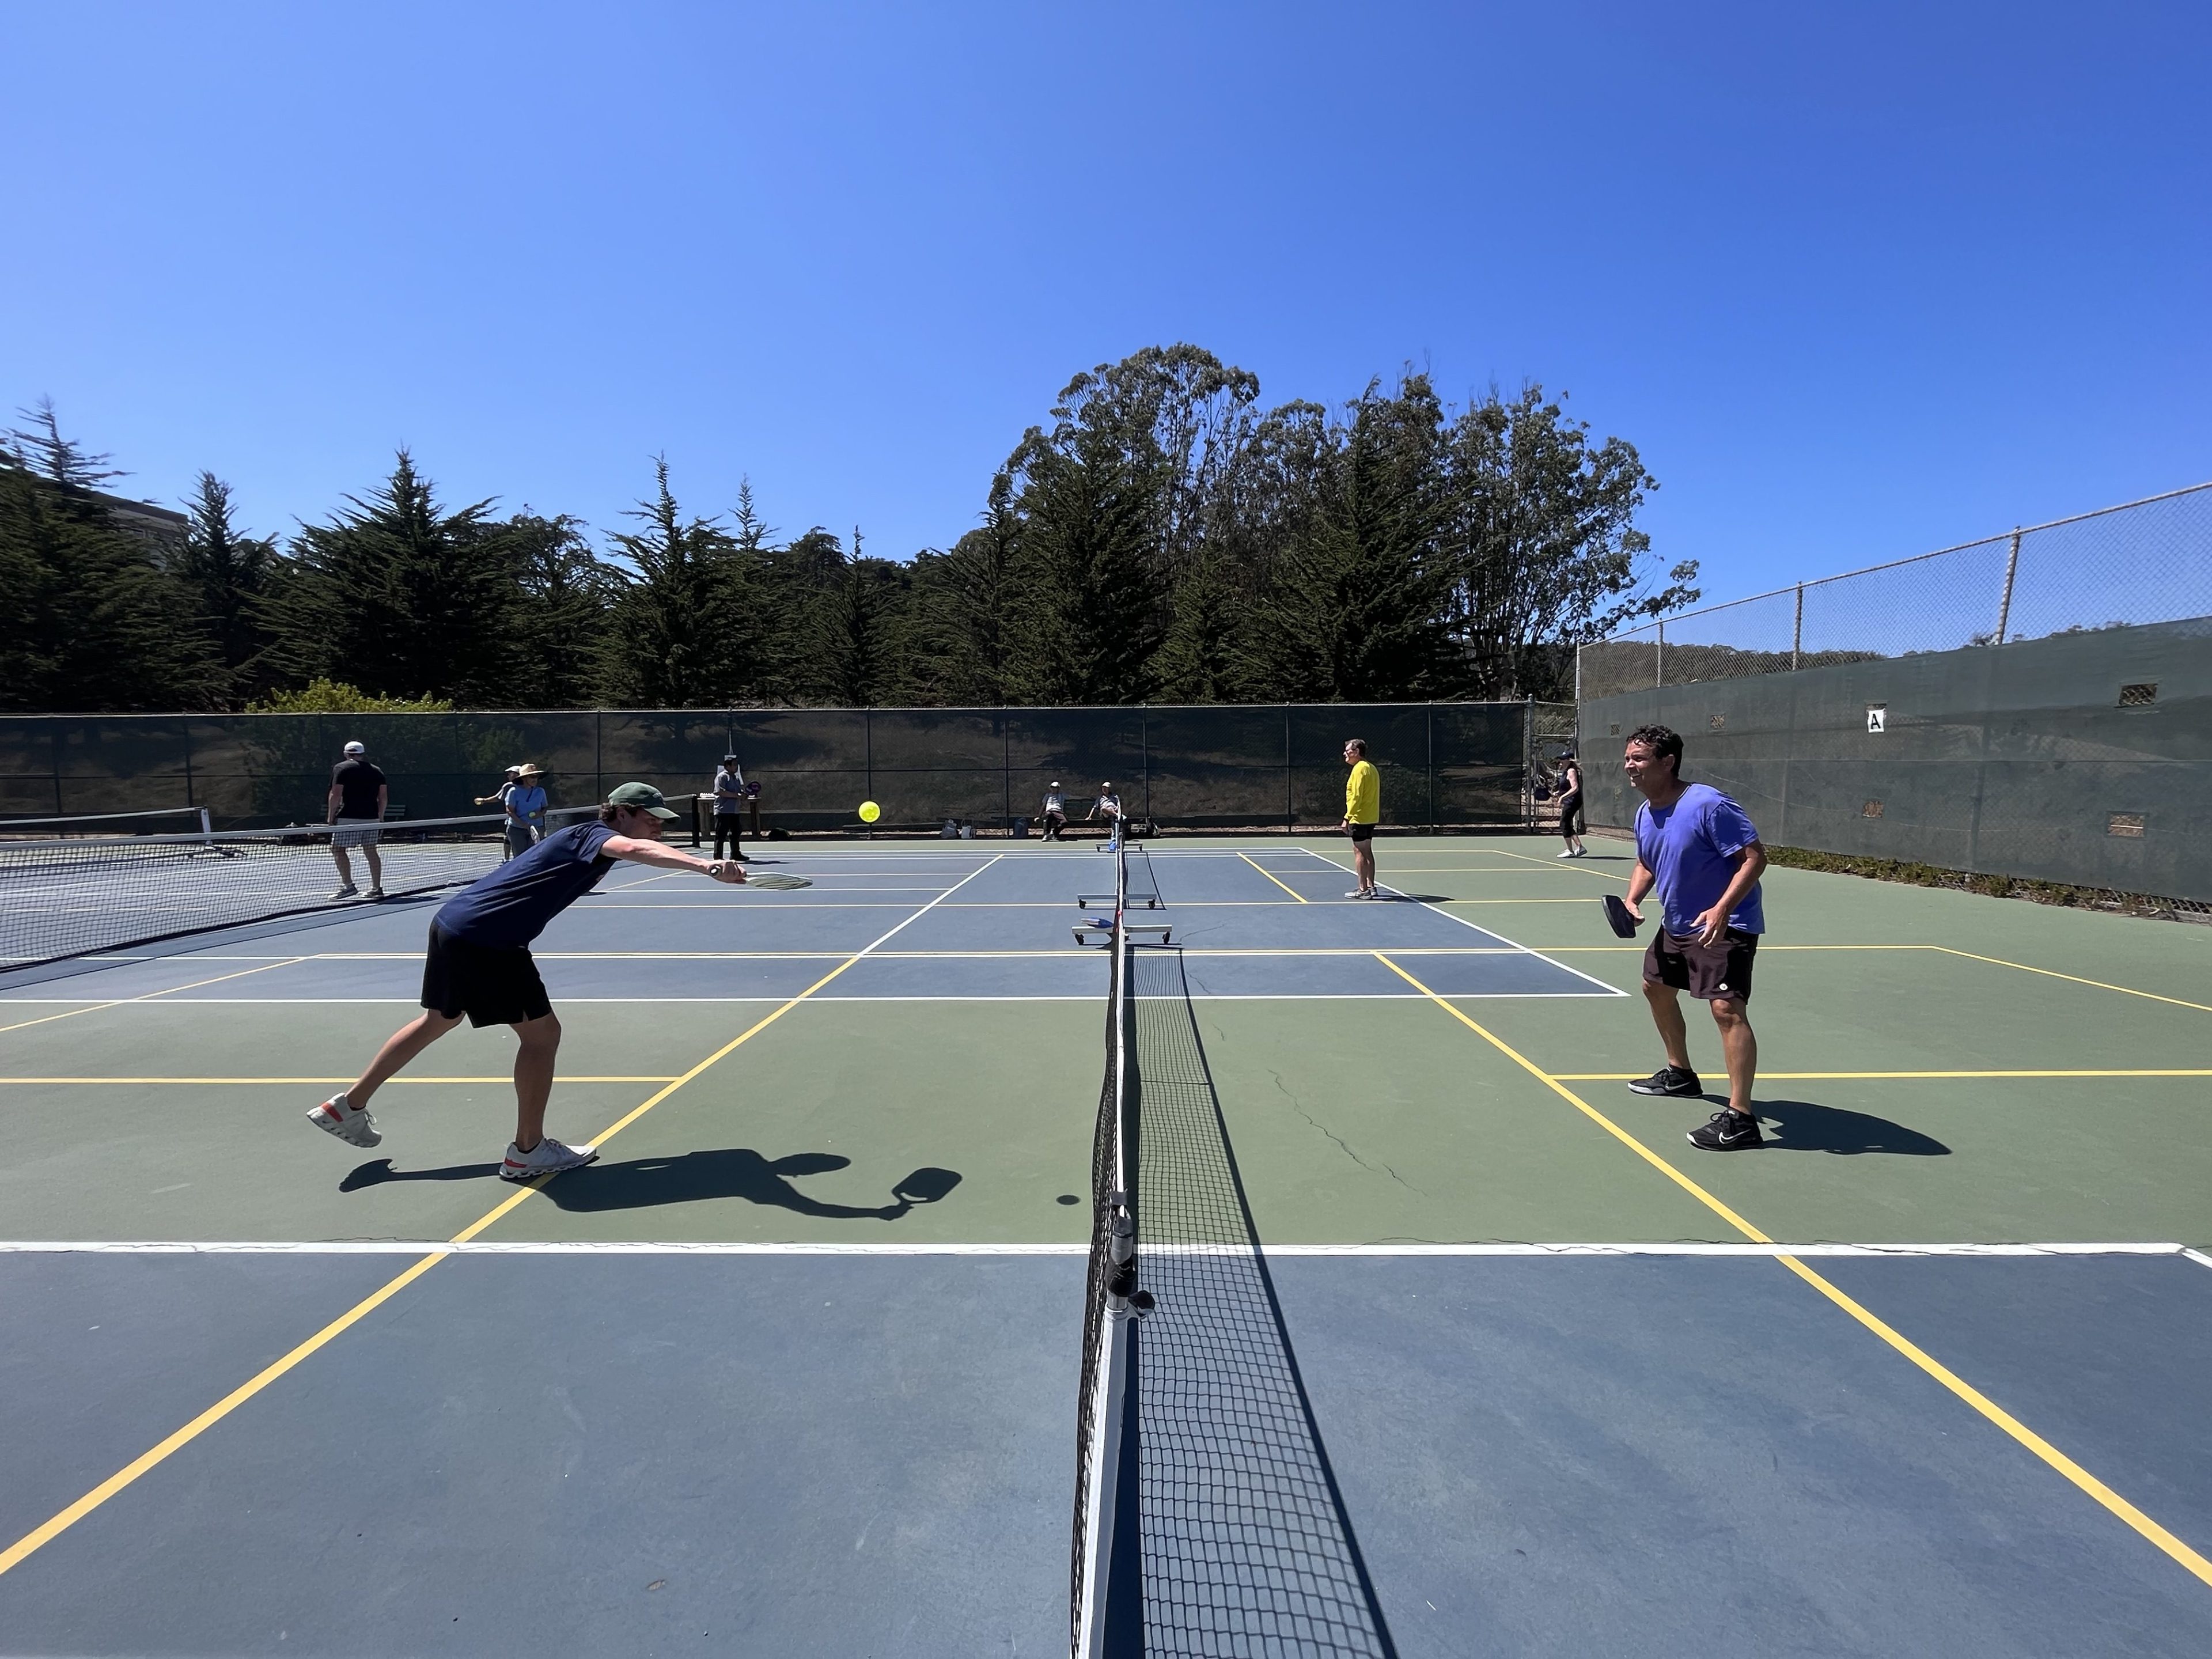 Two men face off in a match of pickleball on a sunny day in San Francisco.